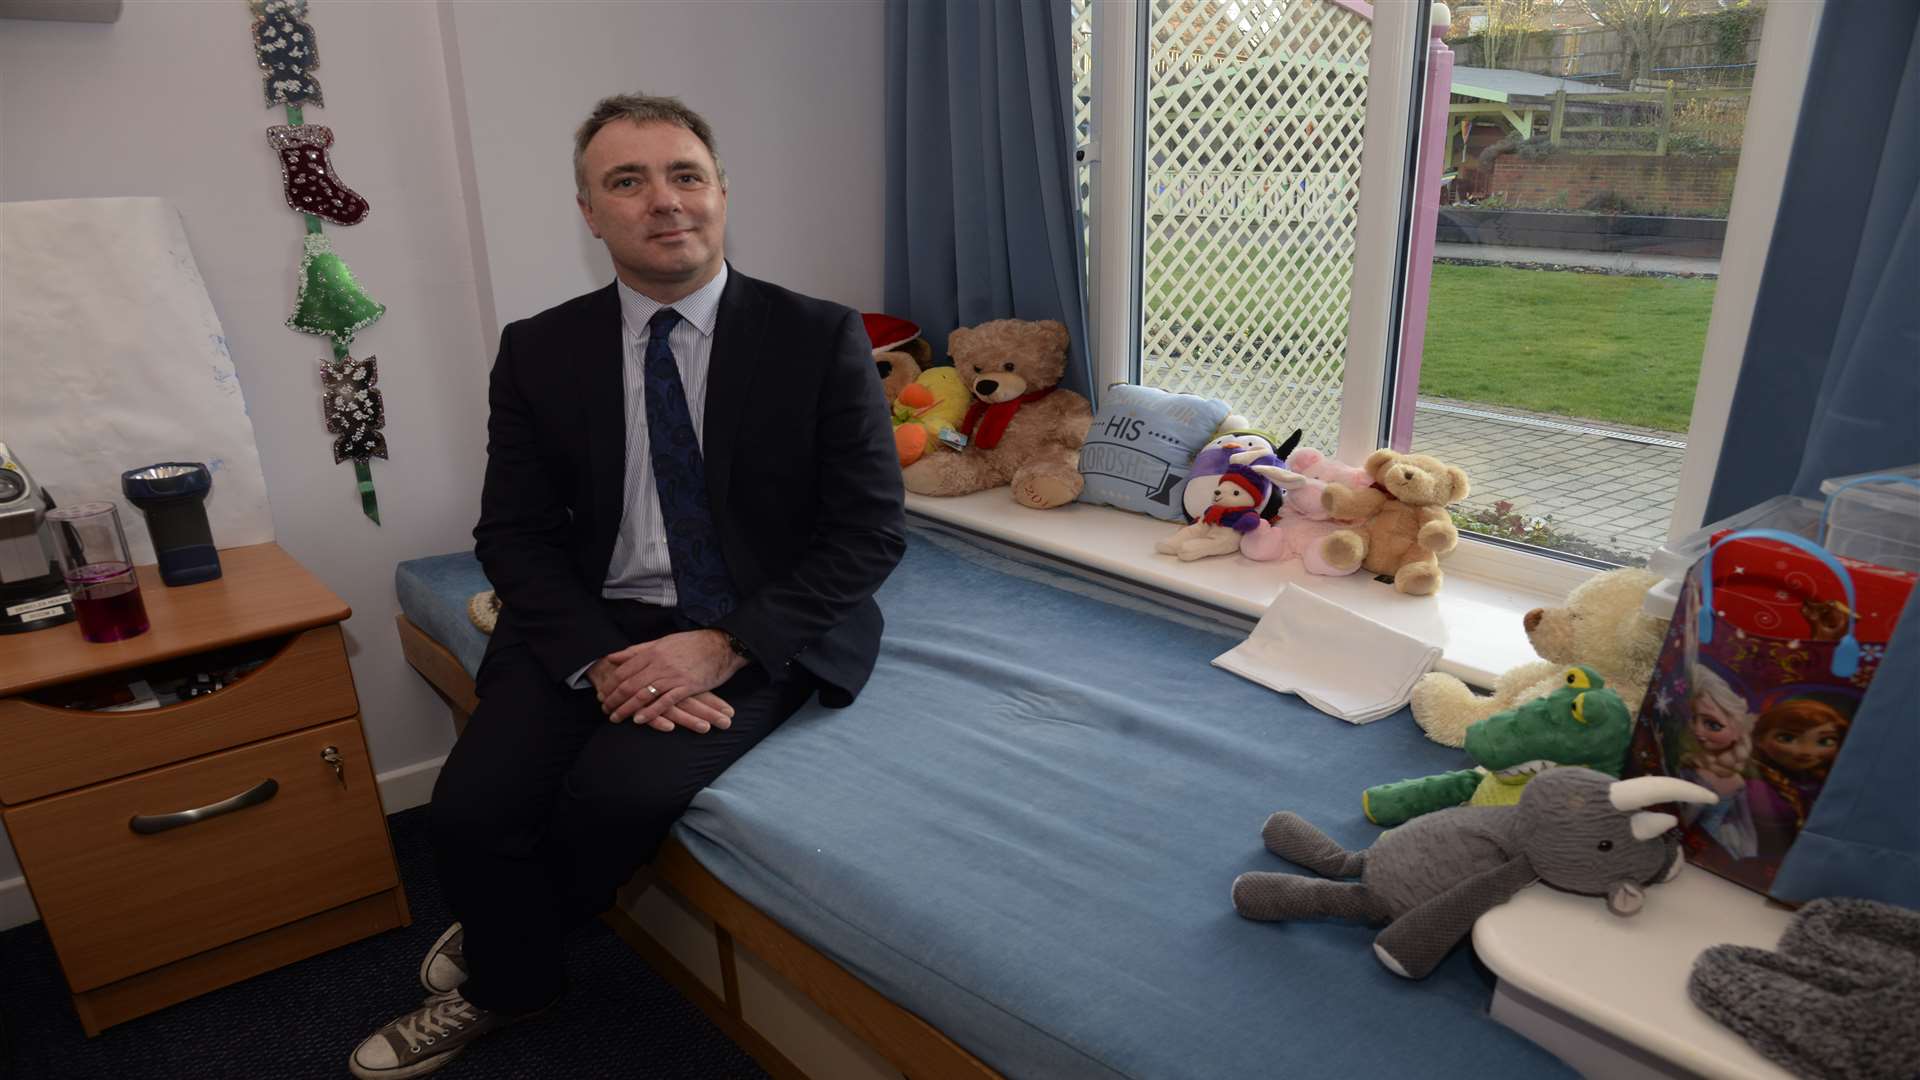 Demelza chief executive Ryan Campbell at the Sittingbourne hospice